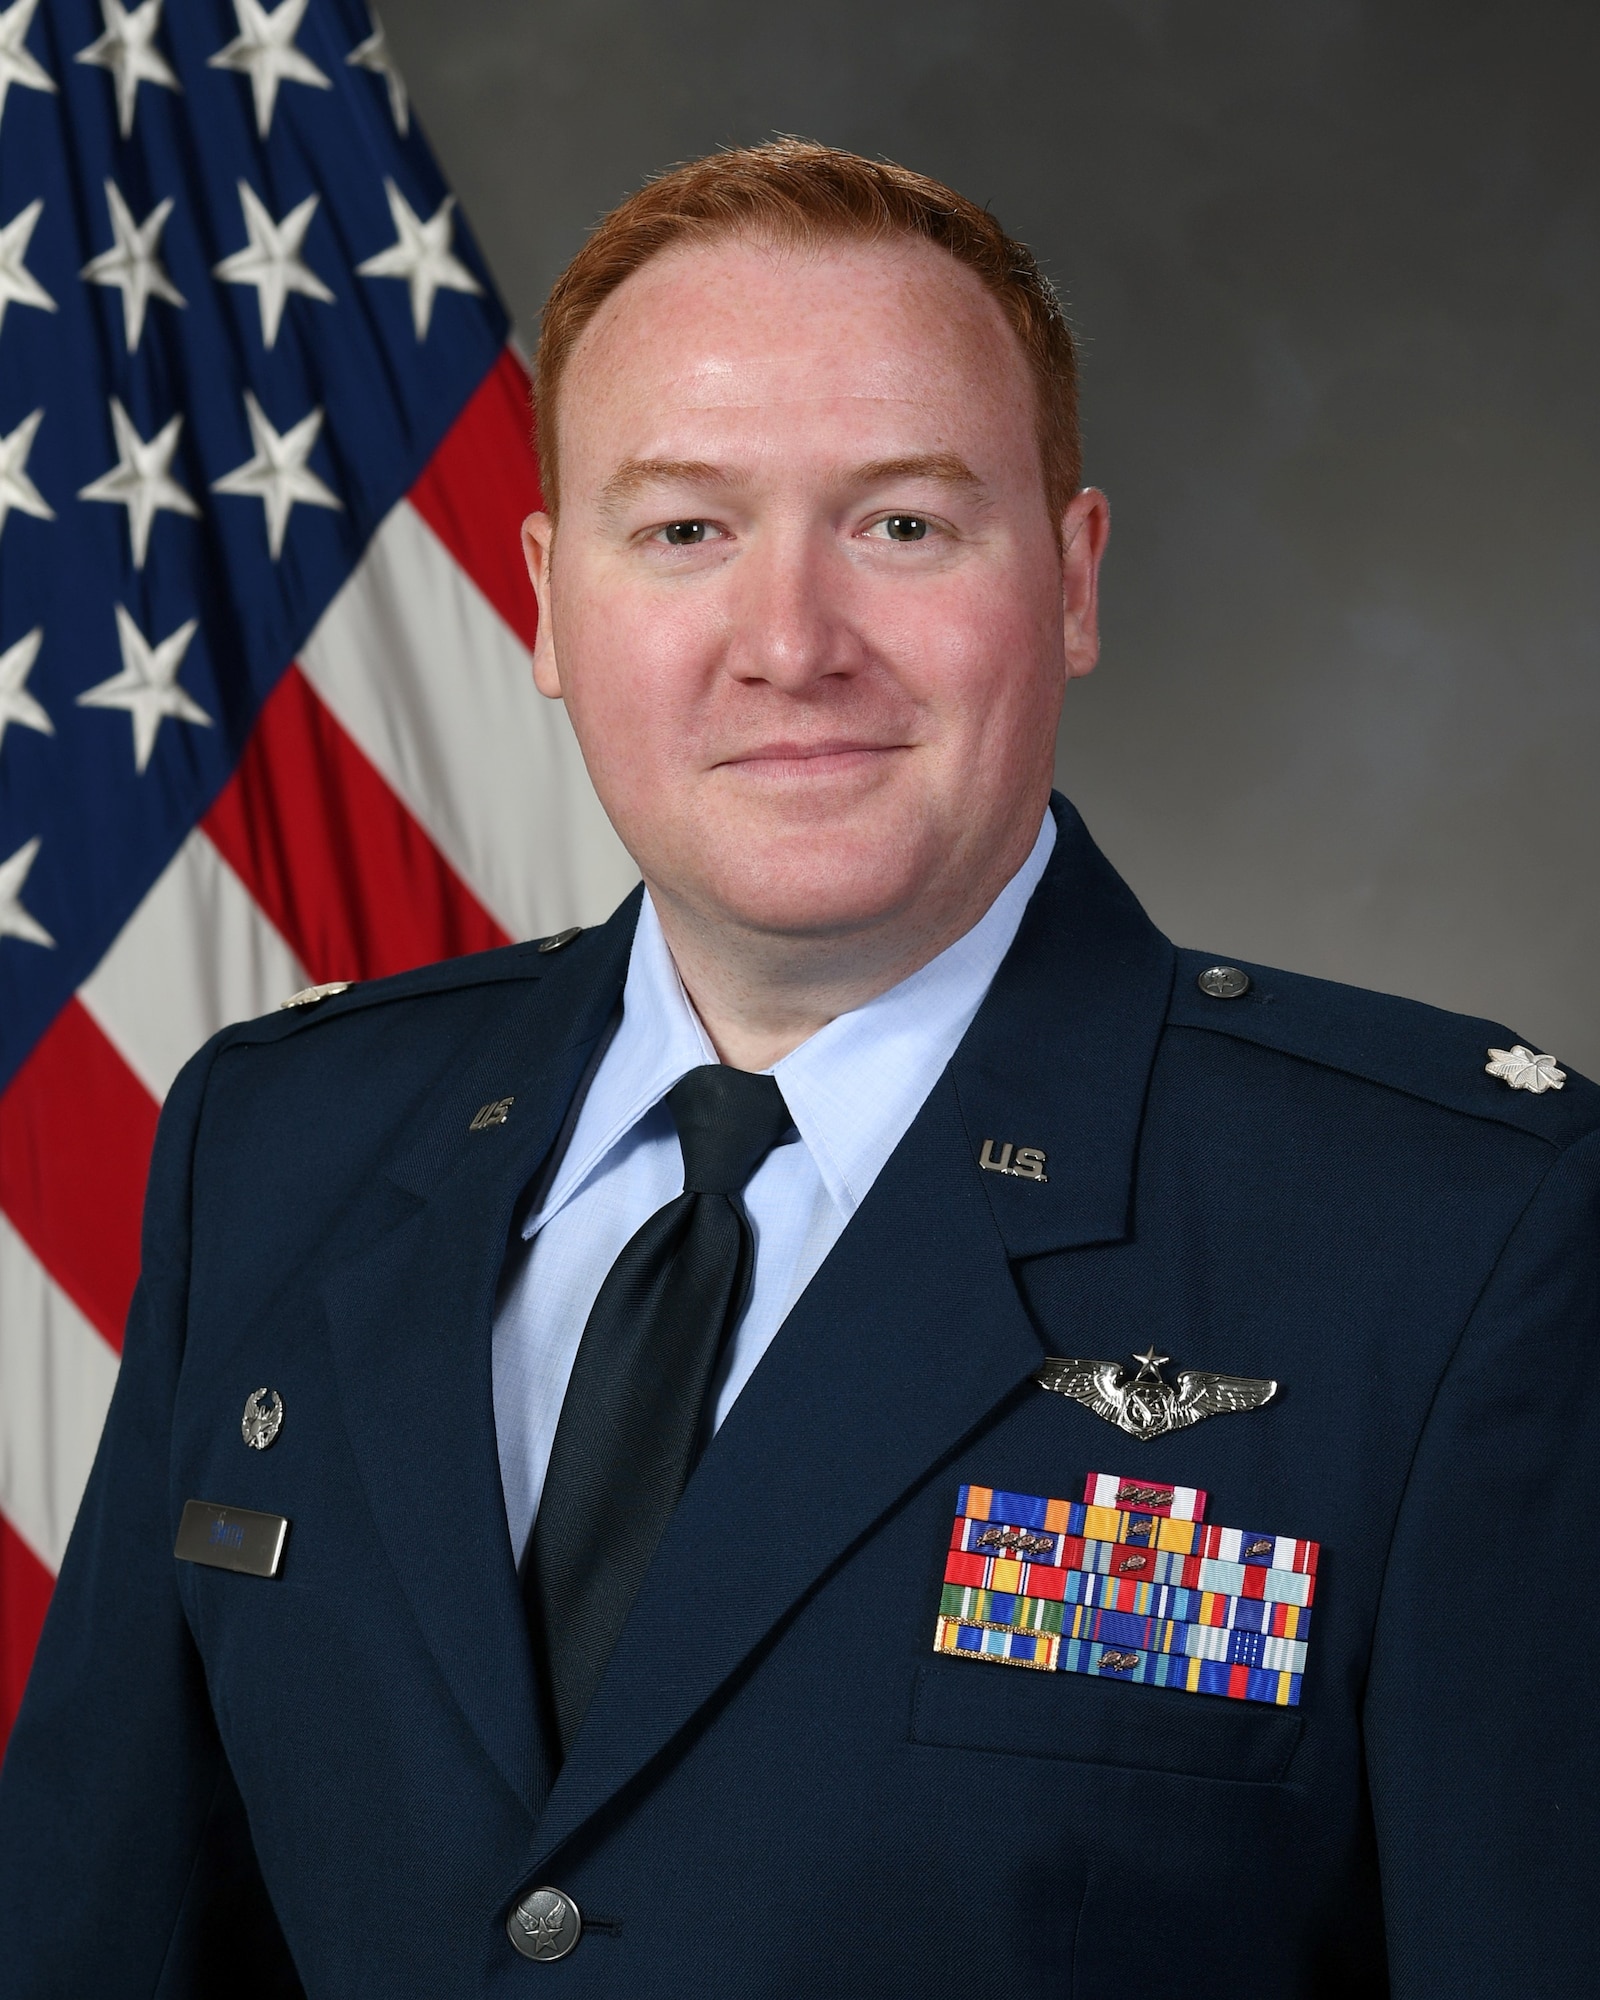 photo of uniformed U.S. Air Force Lt. Col. Ryan Smith wearing service dress uniform in front of a U.S. flag and gray background